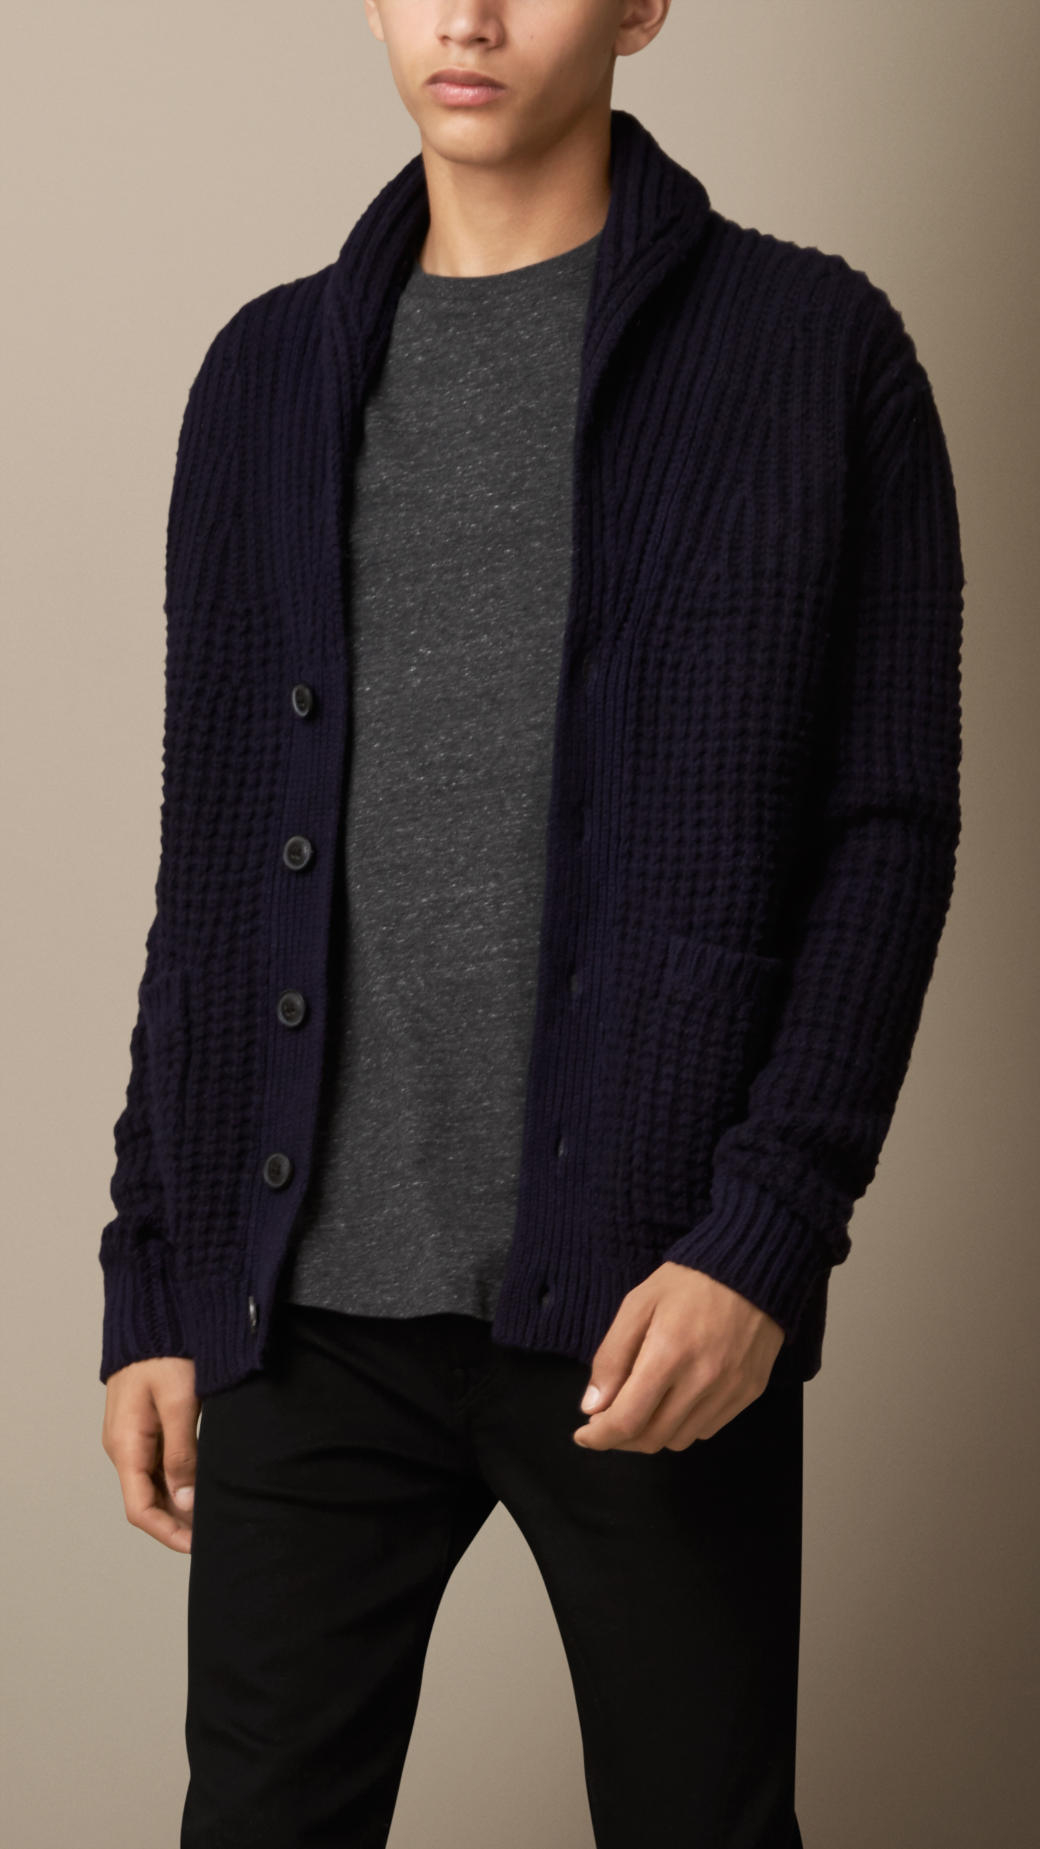 Lyst - Burberry Shawl Collar Wool Cashmere Cardigan in Blue for Men